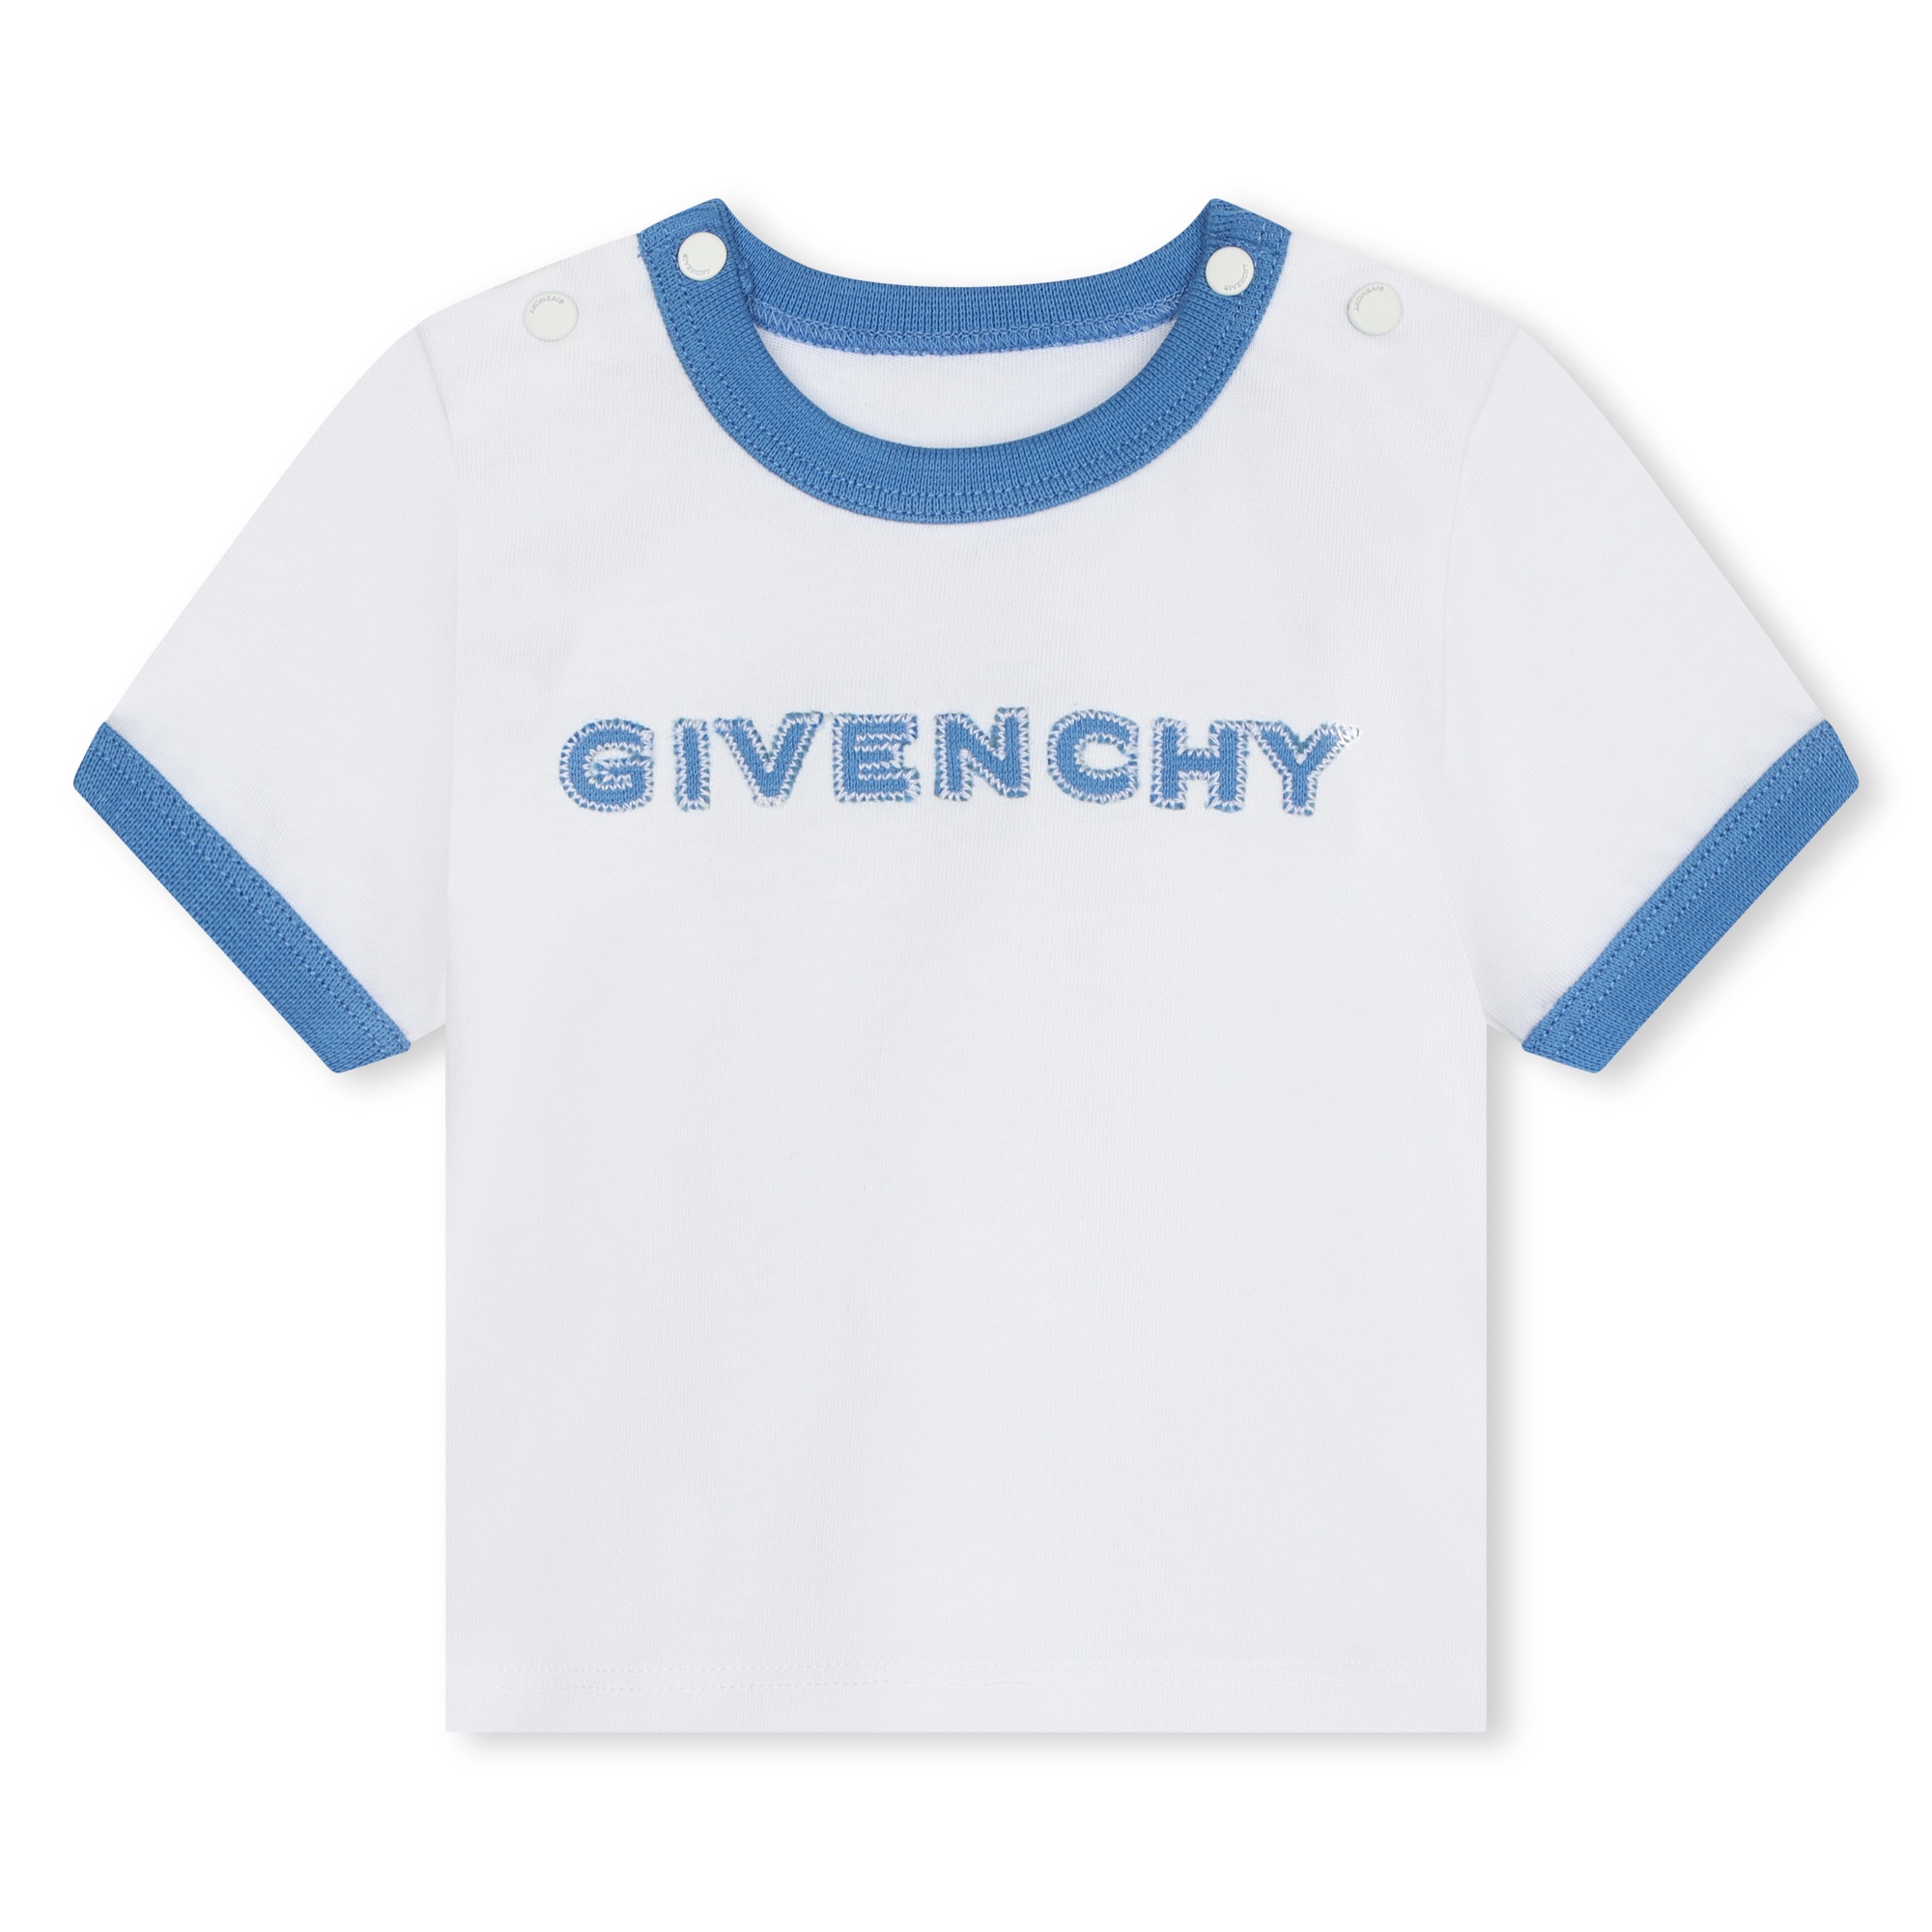 Shorts and T-shirt ensemble GIVENCHY for UNISEX